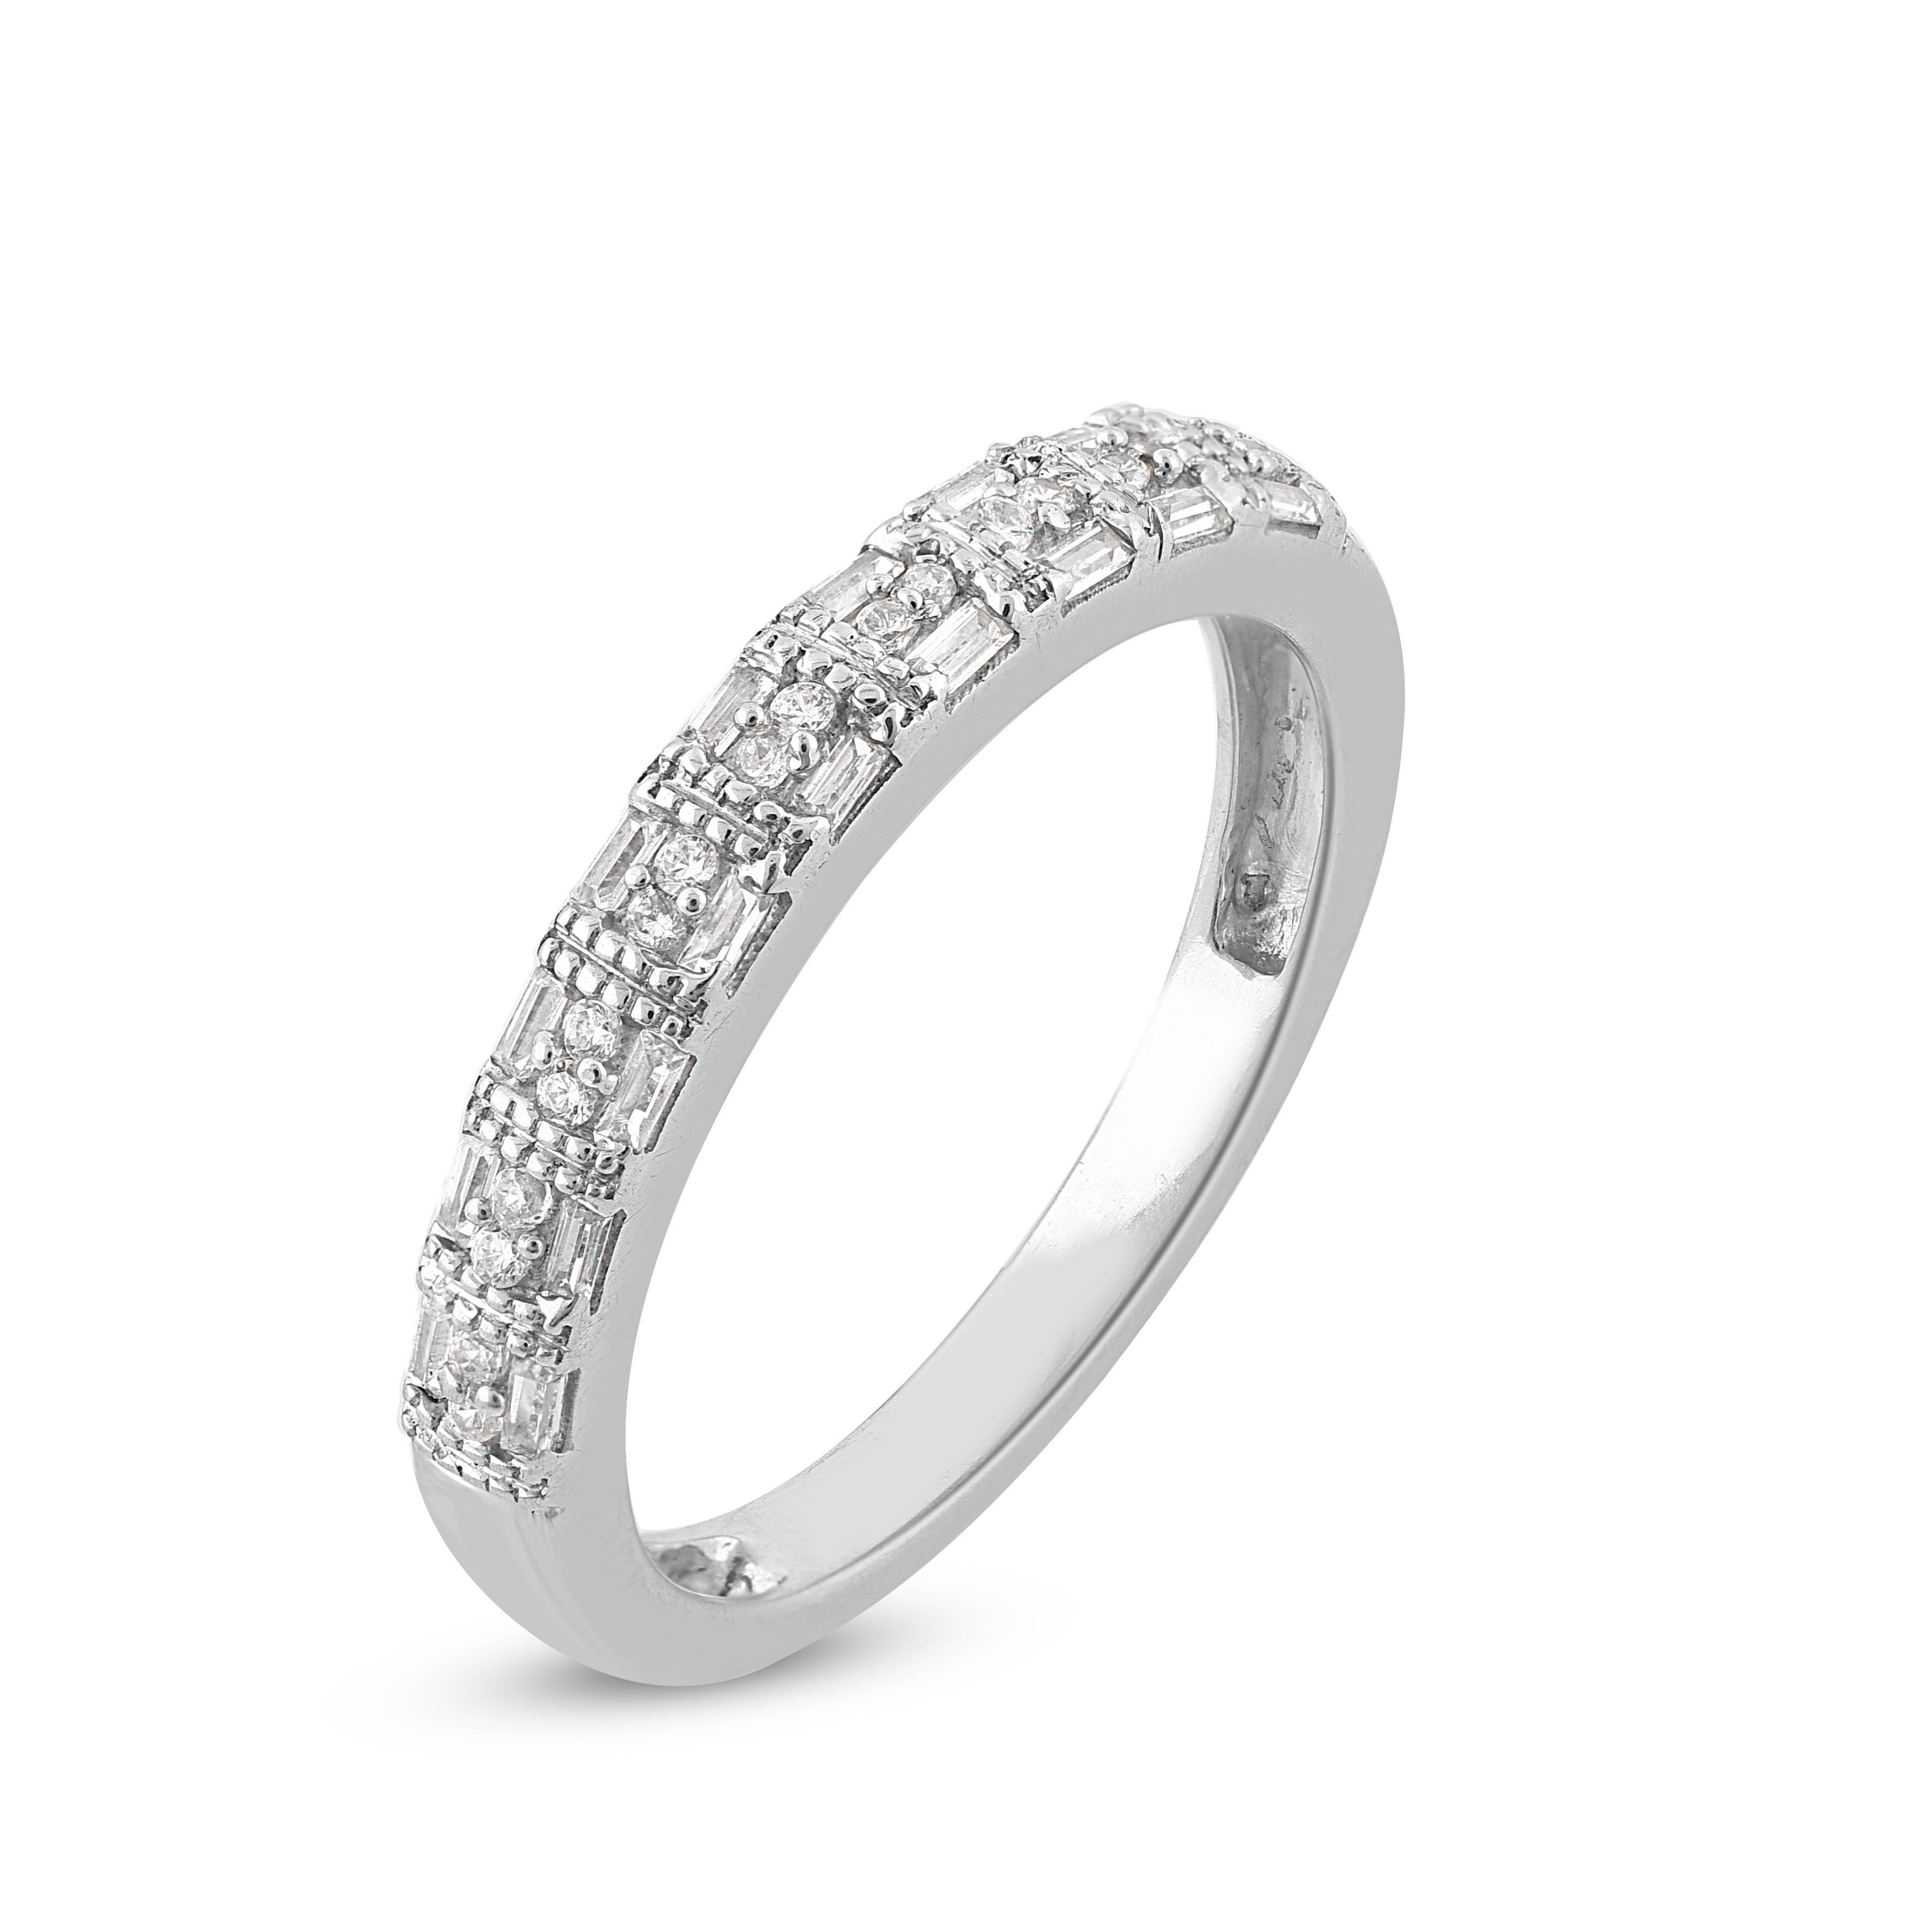 Honor your special day with this exceptional diamond band ring. This band ring features a sparkling 36 single cut & baguette diamonds beautifully set in bezel & channel setting. The total diamond weight is 0.25 Carat. The diamonds are graded as H-I